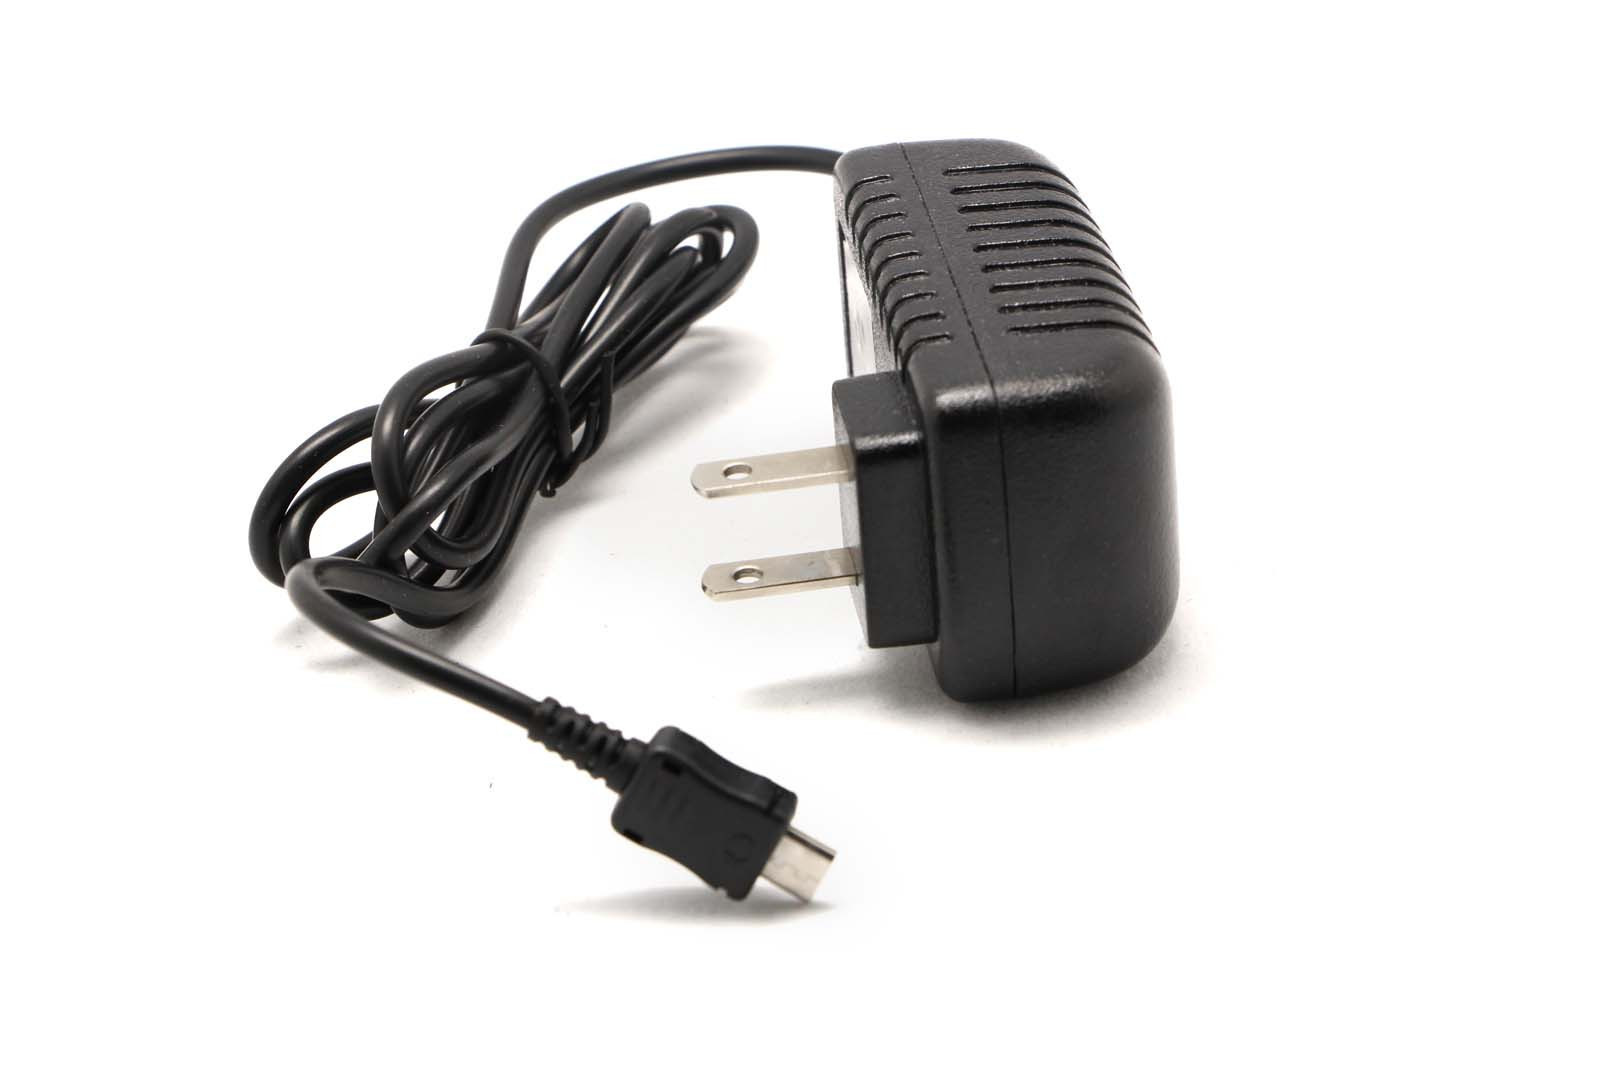 2A AC Travel Home Wall Power Charger/Adapter Cord for Blackberry Tablet Playbook